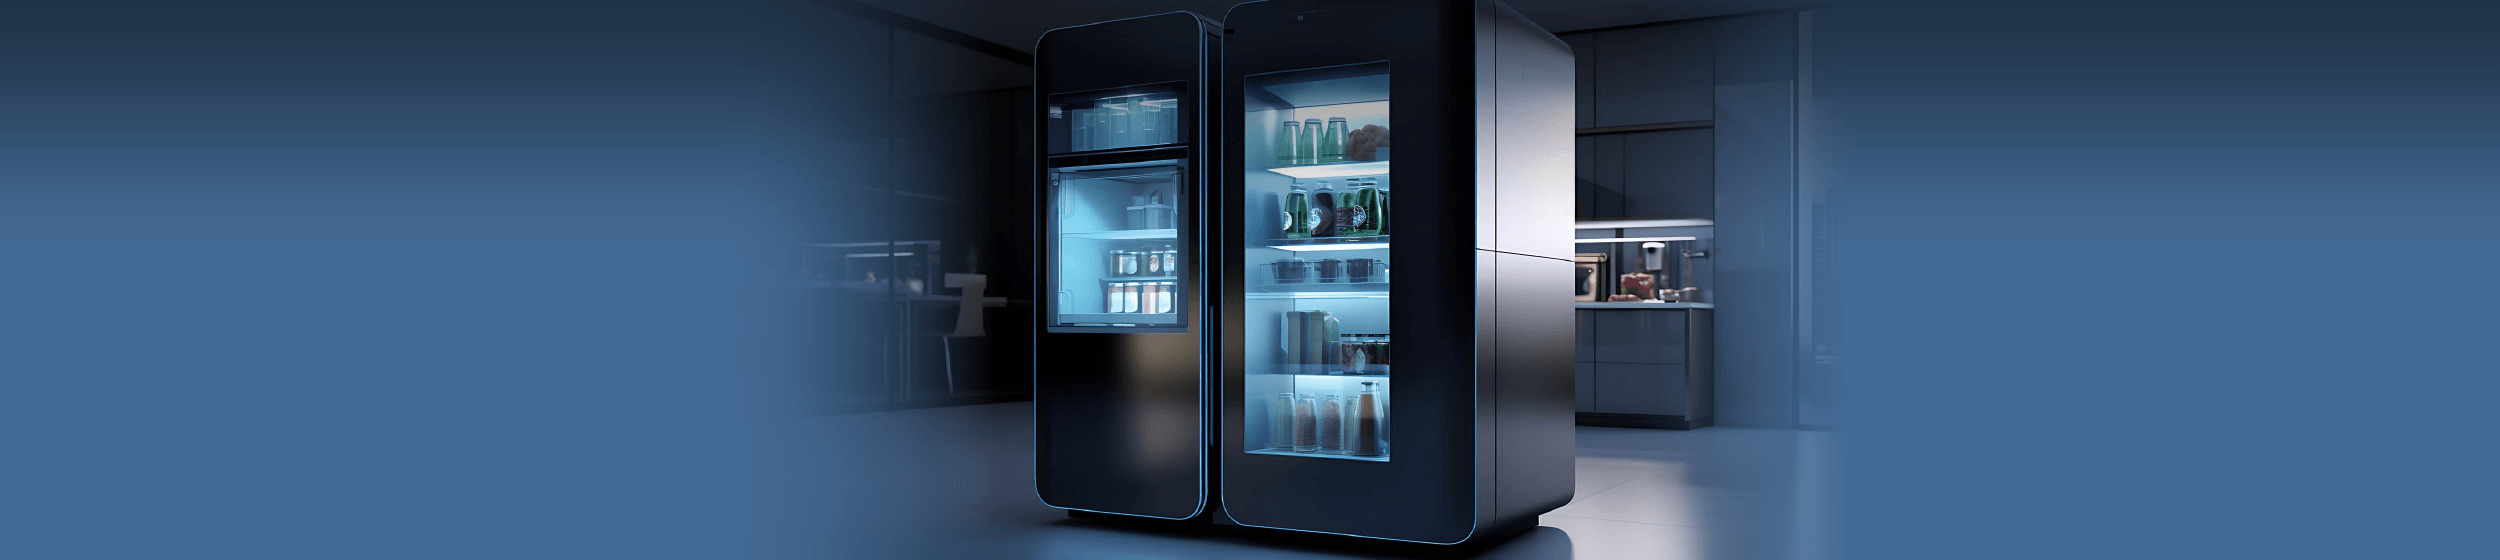 Banner-Hassle-free Access to Fresh Food through a Connected Freezer for a Leading US-based Manufacturer